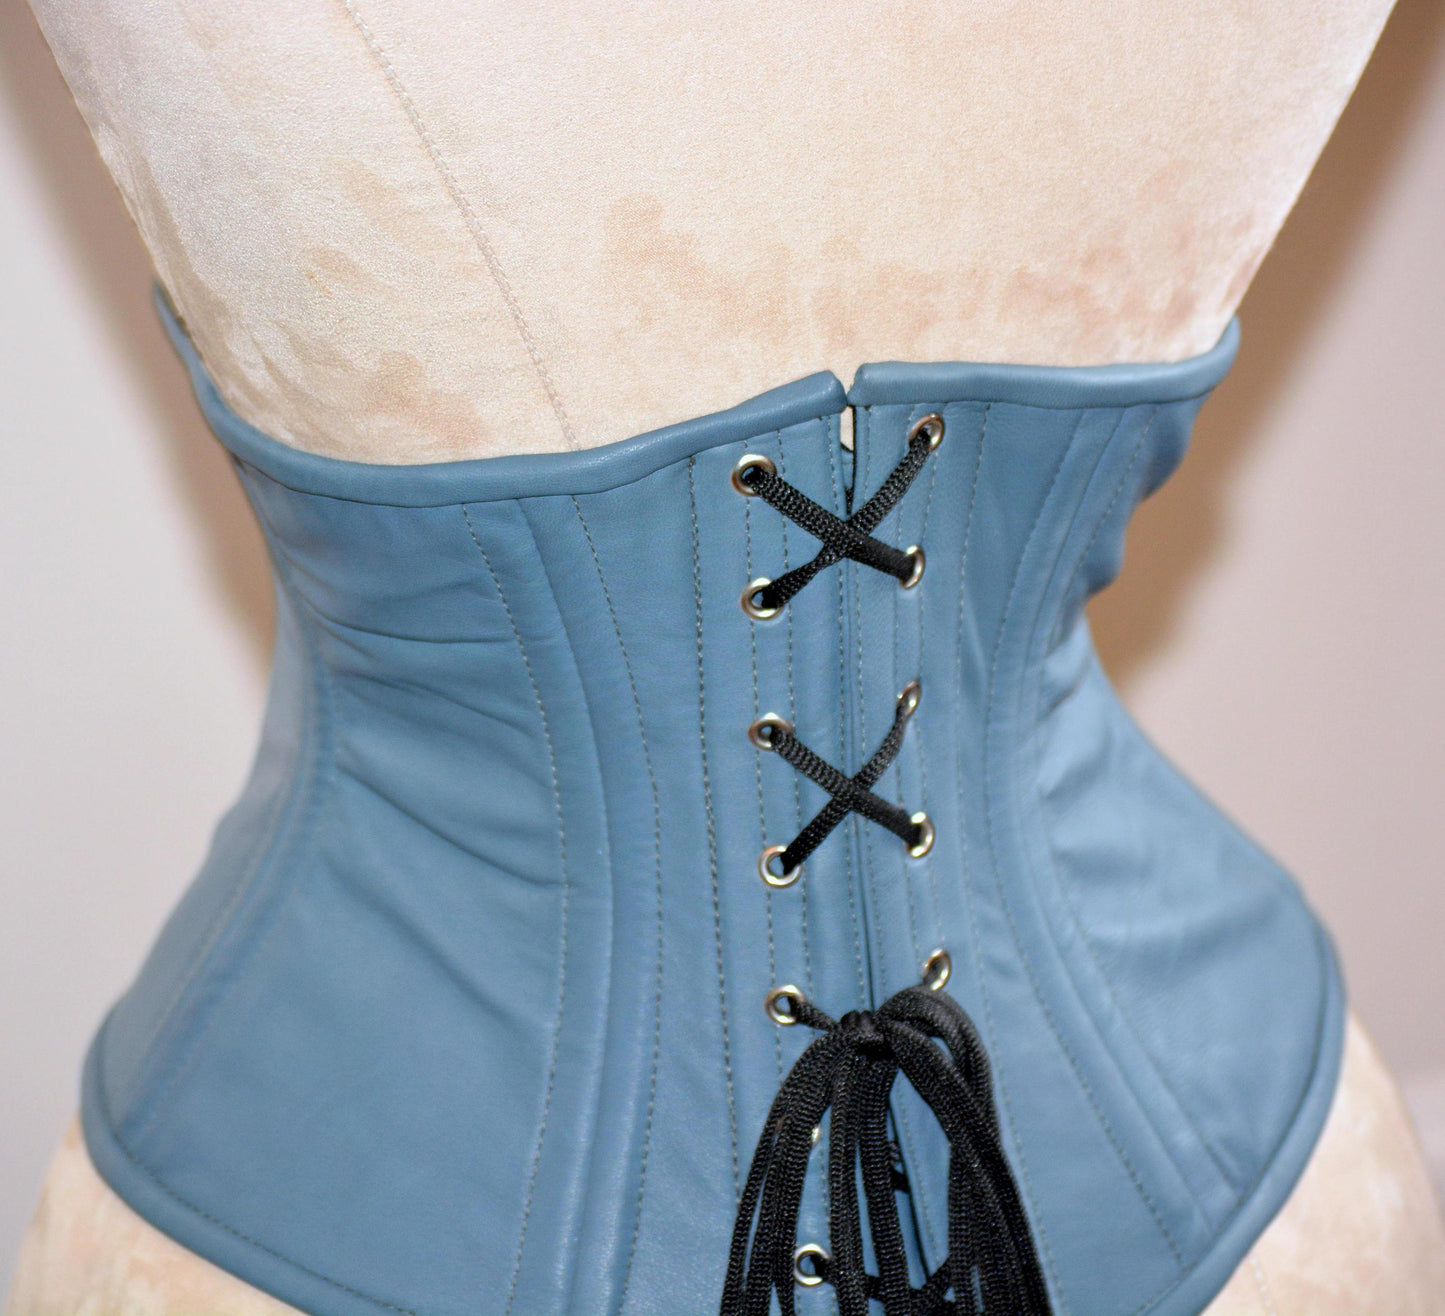 Authentic steel-boned corsets for tight lacing and waist training